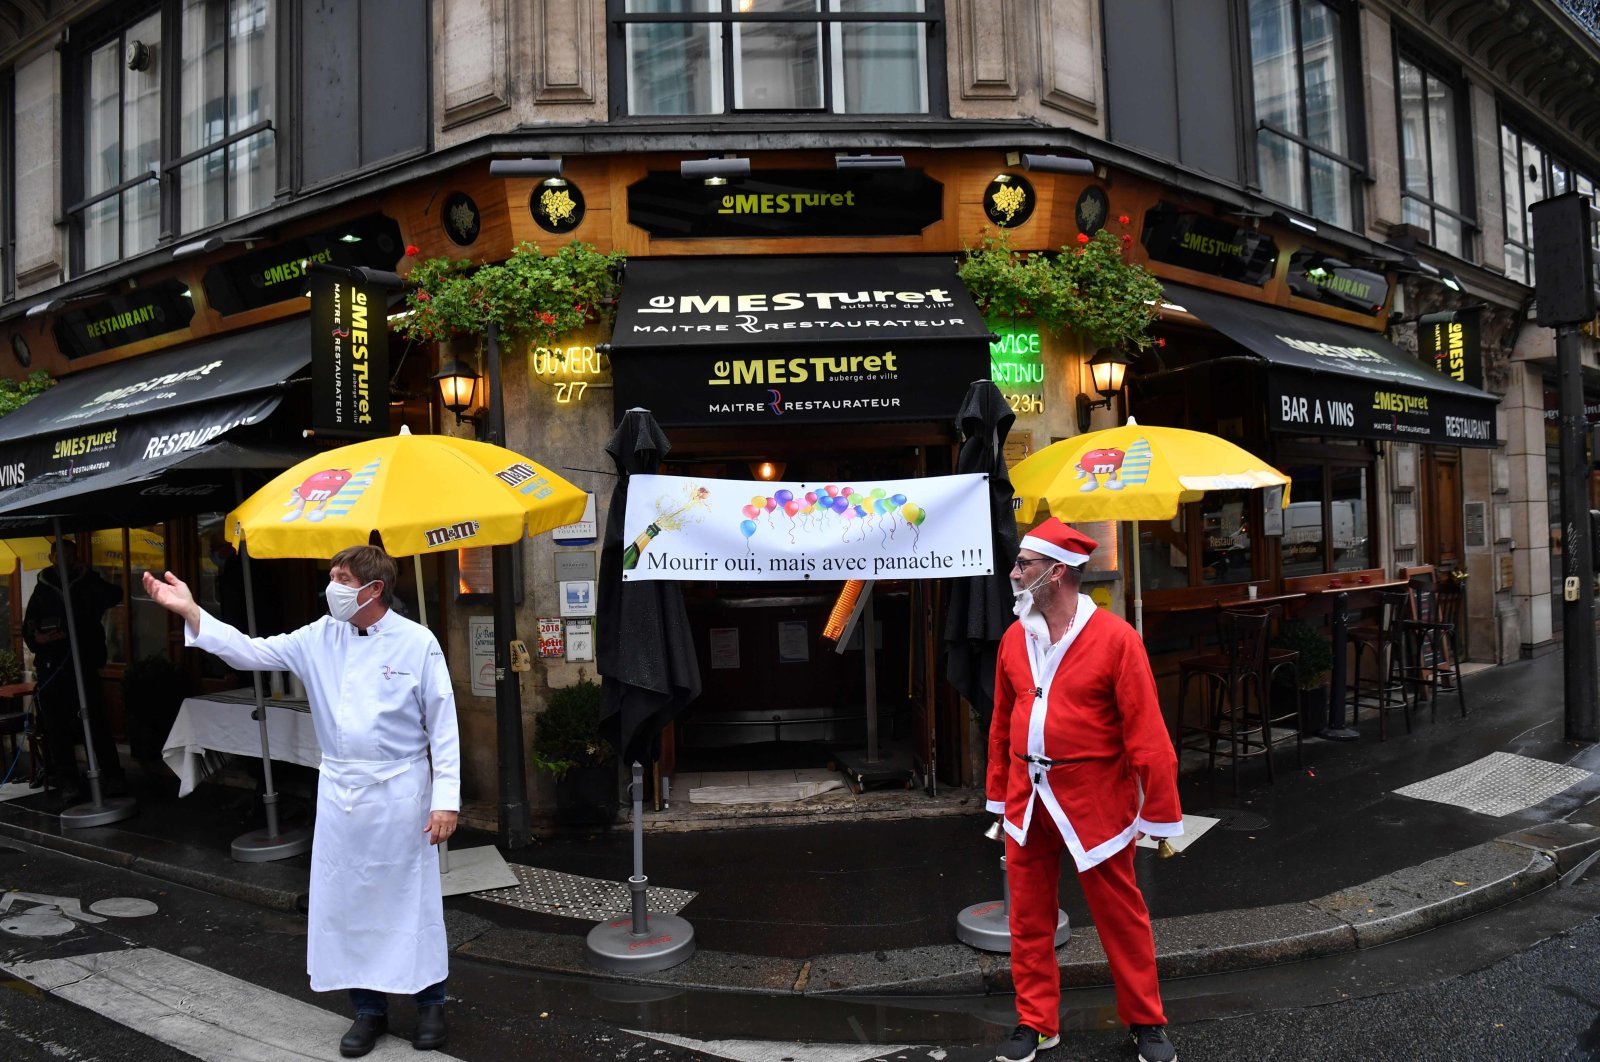 Restaurant owners stand next to a banner reading "To die, yes, but with panache!" in front of "Le Mesturet" restaurant in Paris on Oct. 2, 2020, to protest after the French government imposed fresh curbs to limit the spread of the Covid-19 diseases caused by the novel coronavirus. (AFP Photo)